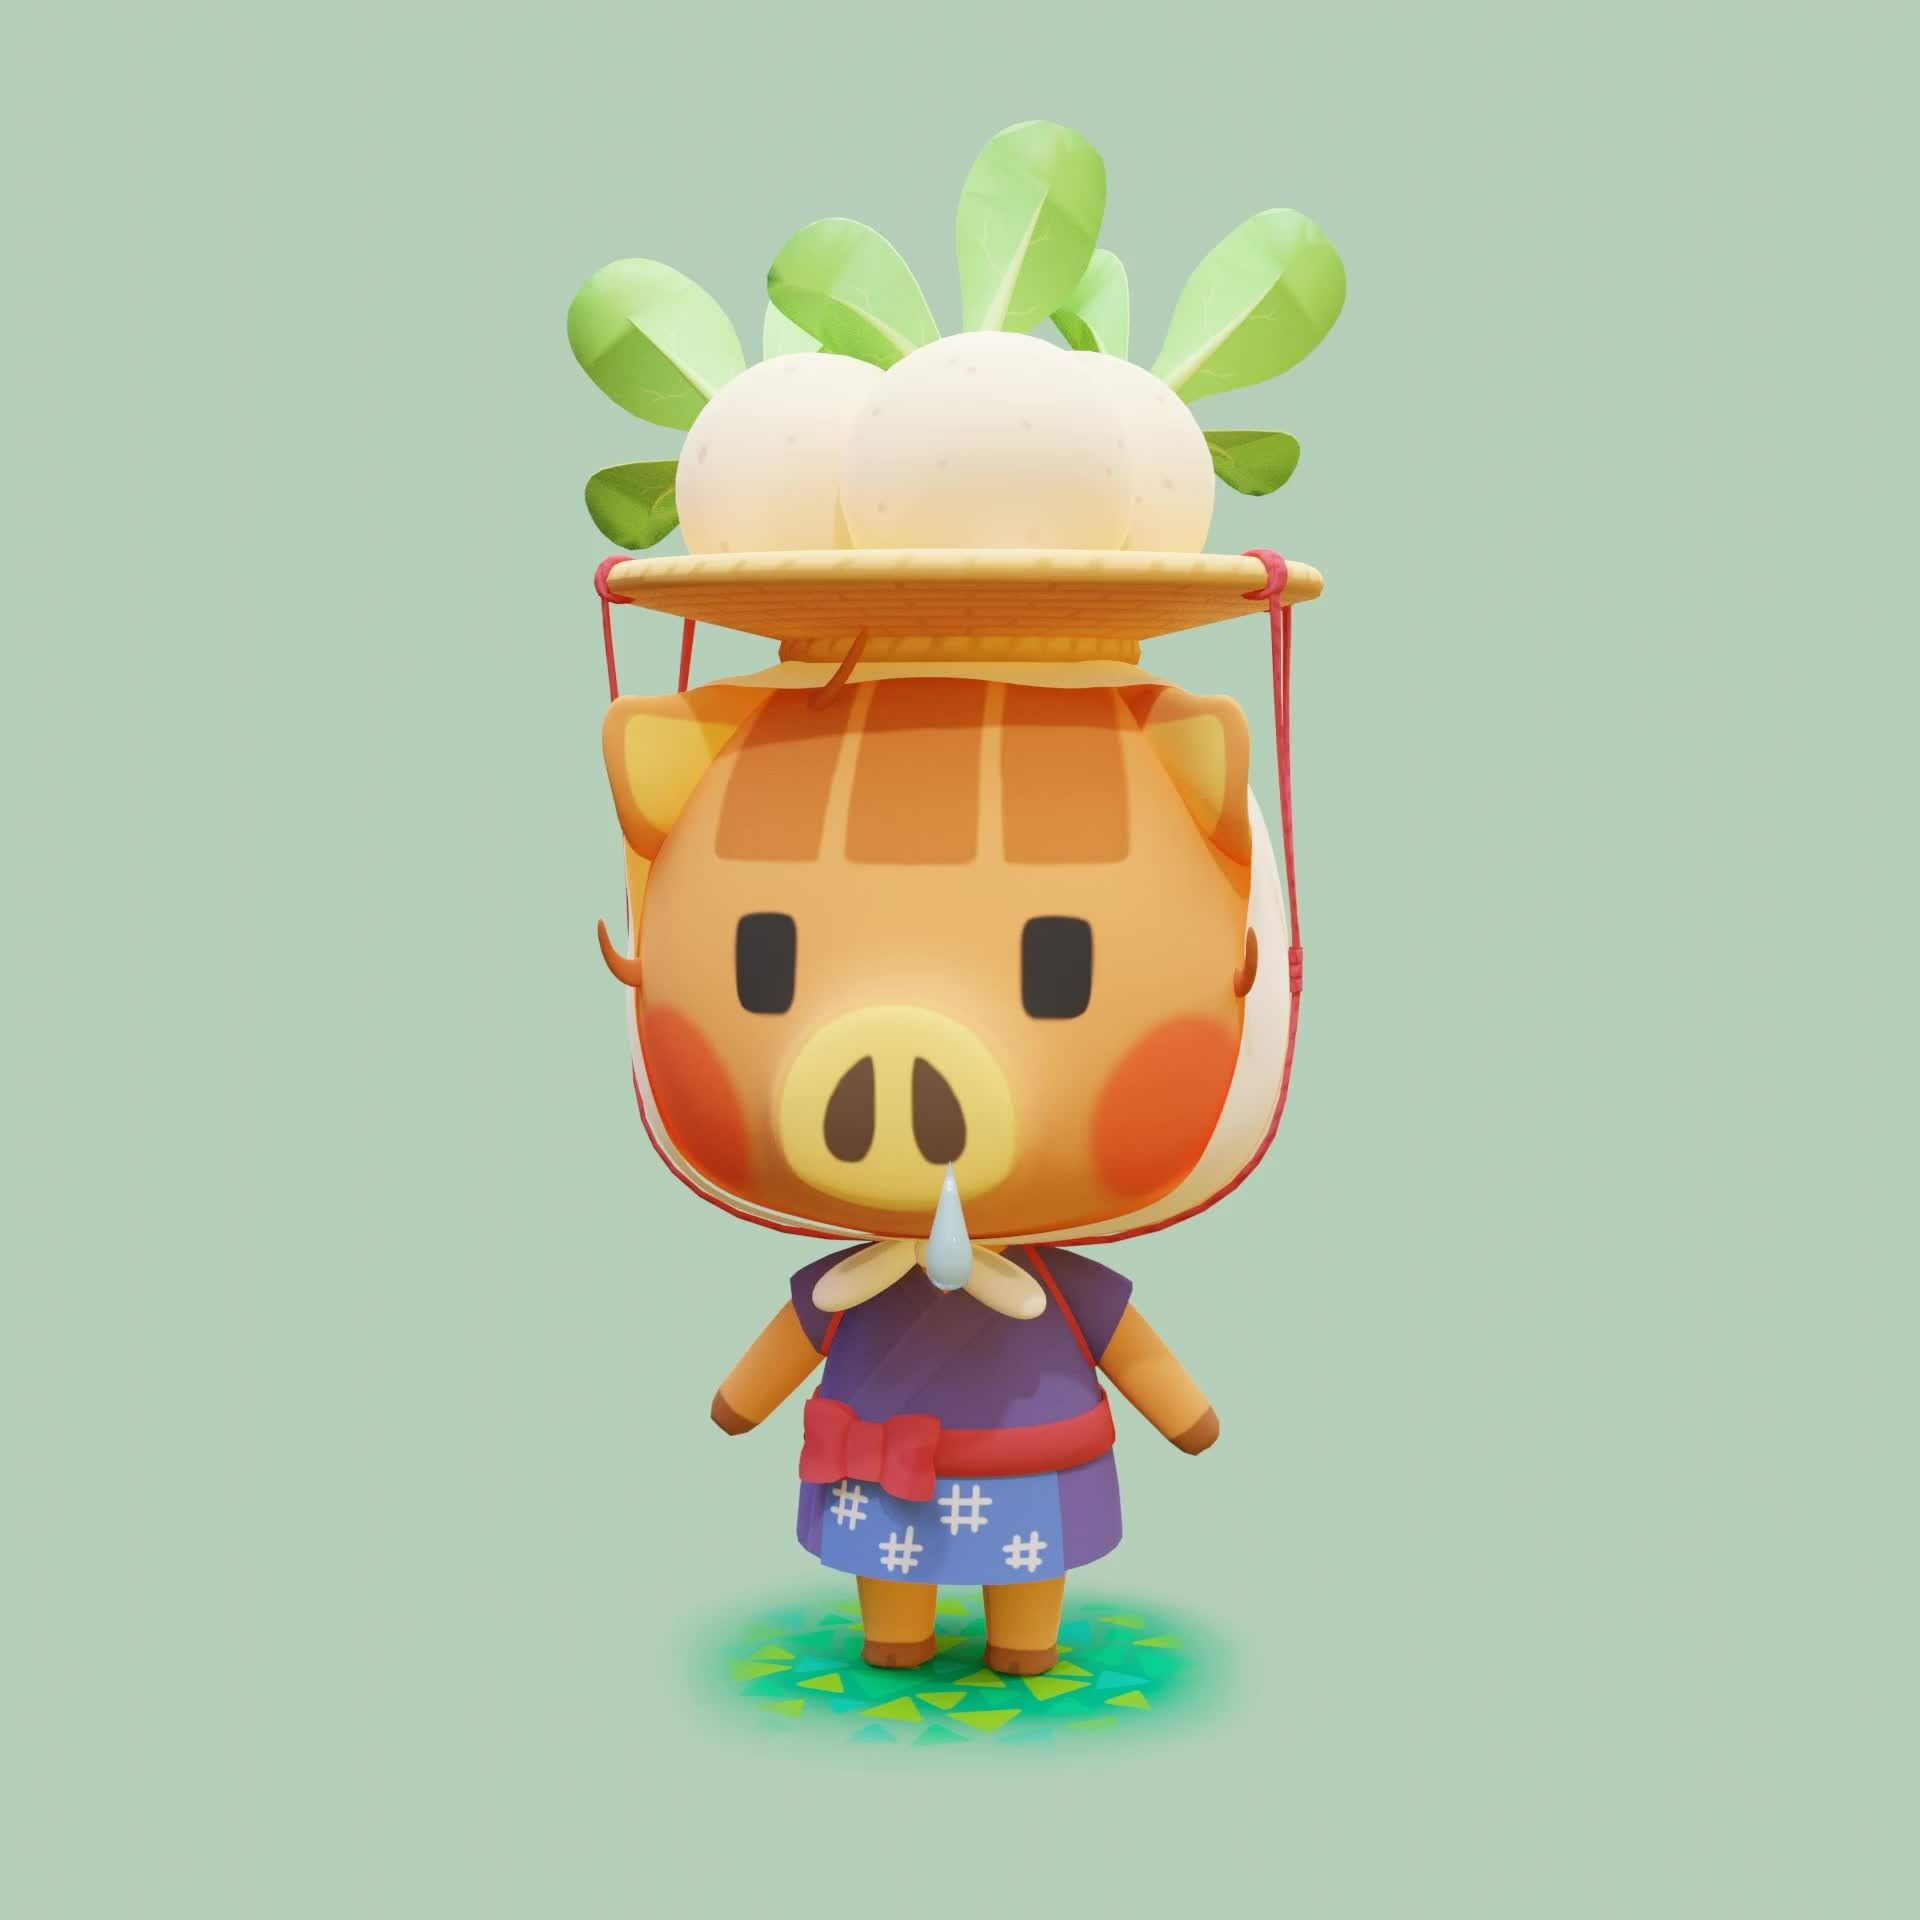 Daisy Mae (Animal Crossing New Horizons), Katie Withers